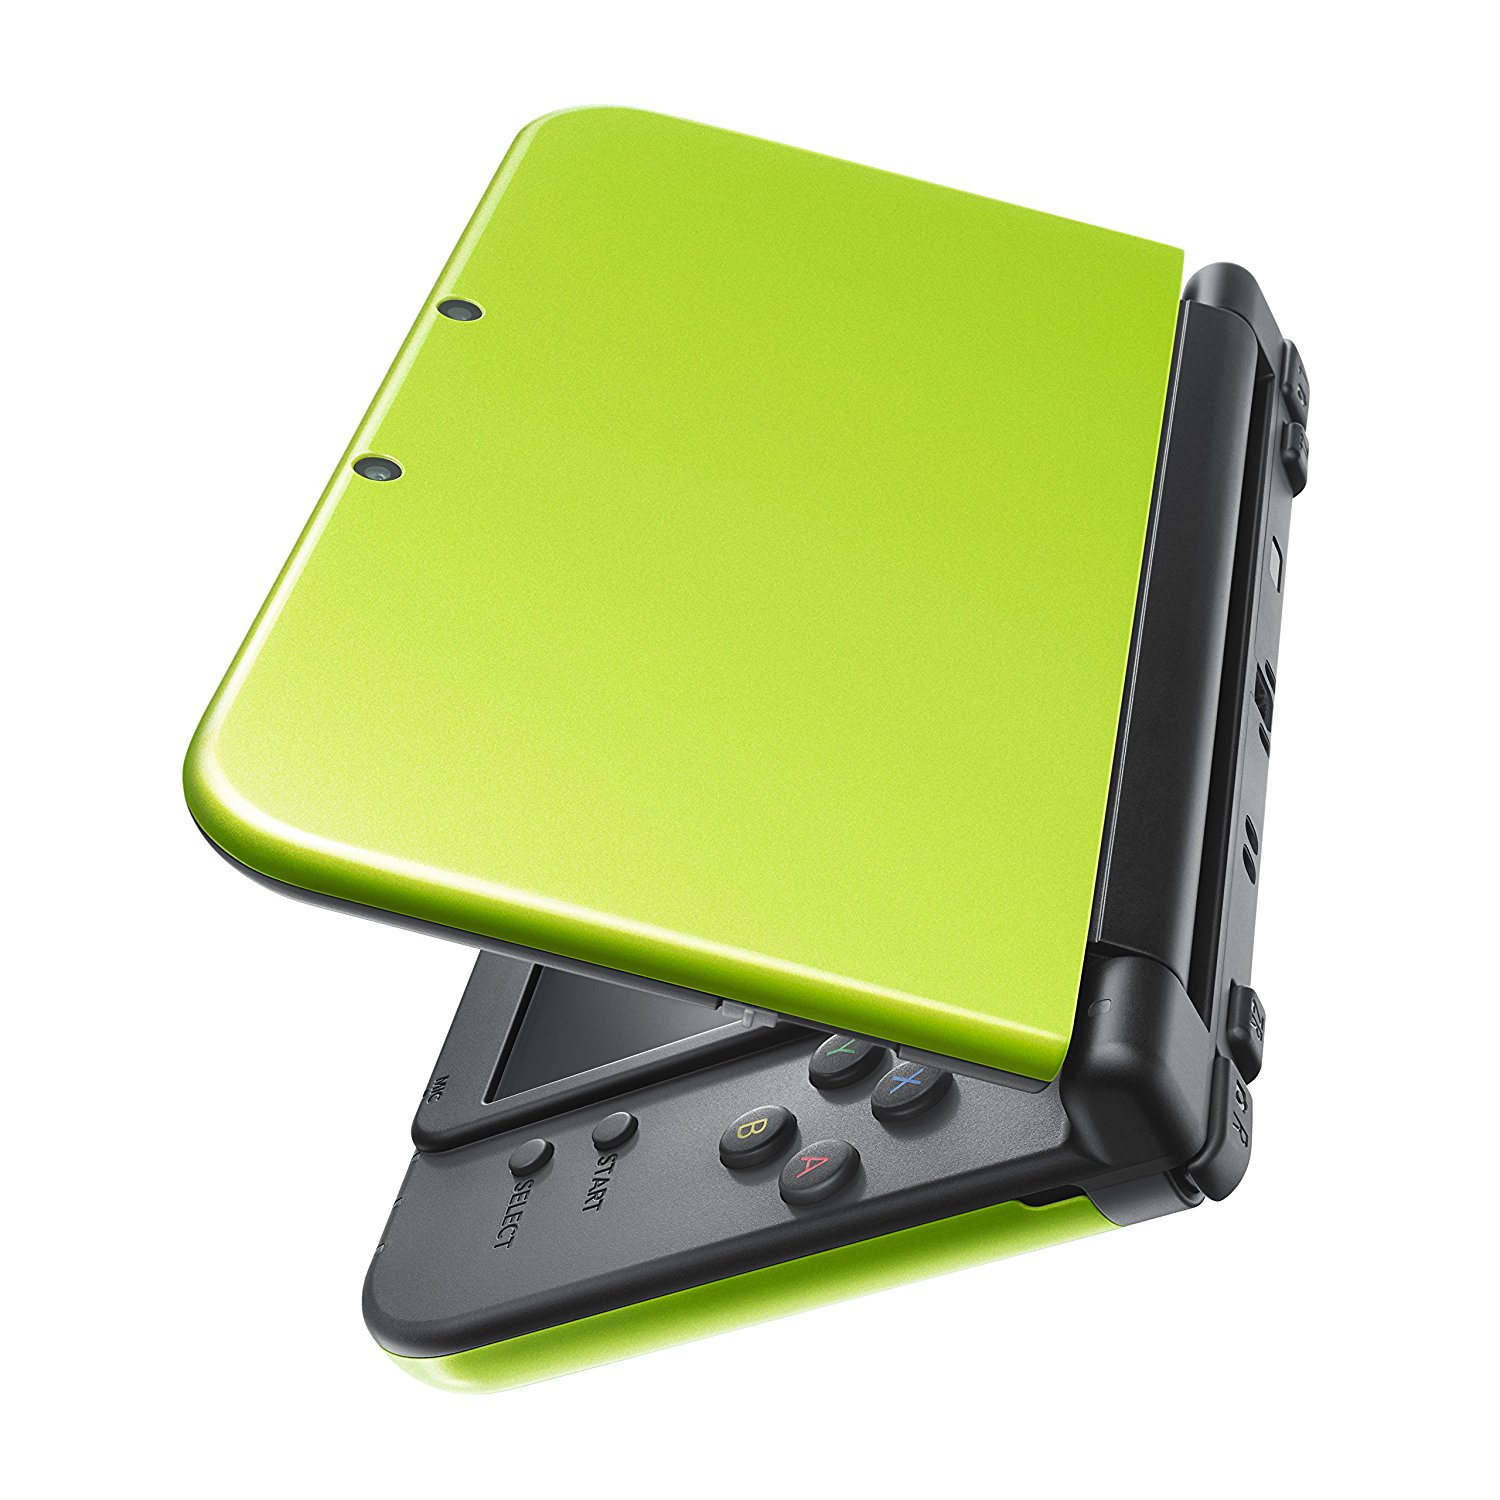 North America: Lime Green New Nintendo 3DS XL now available - Perfectly